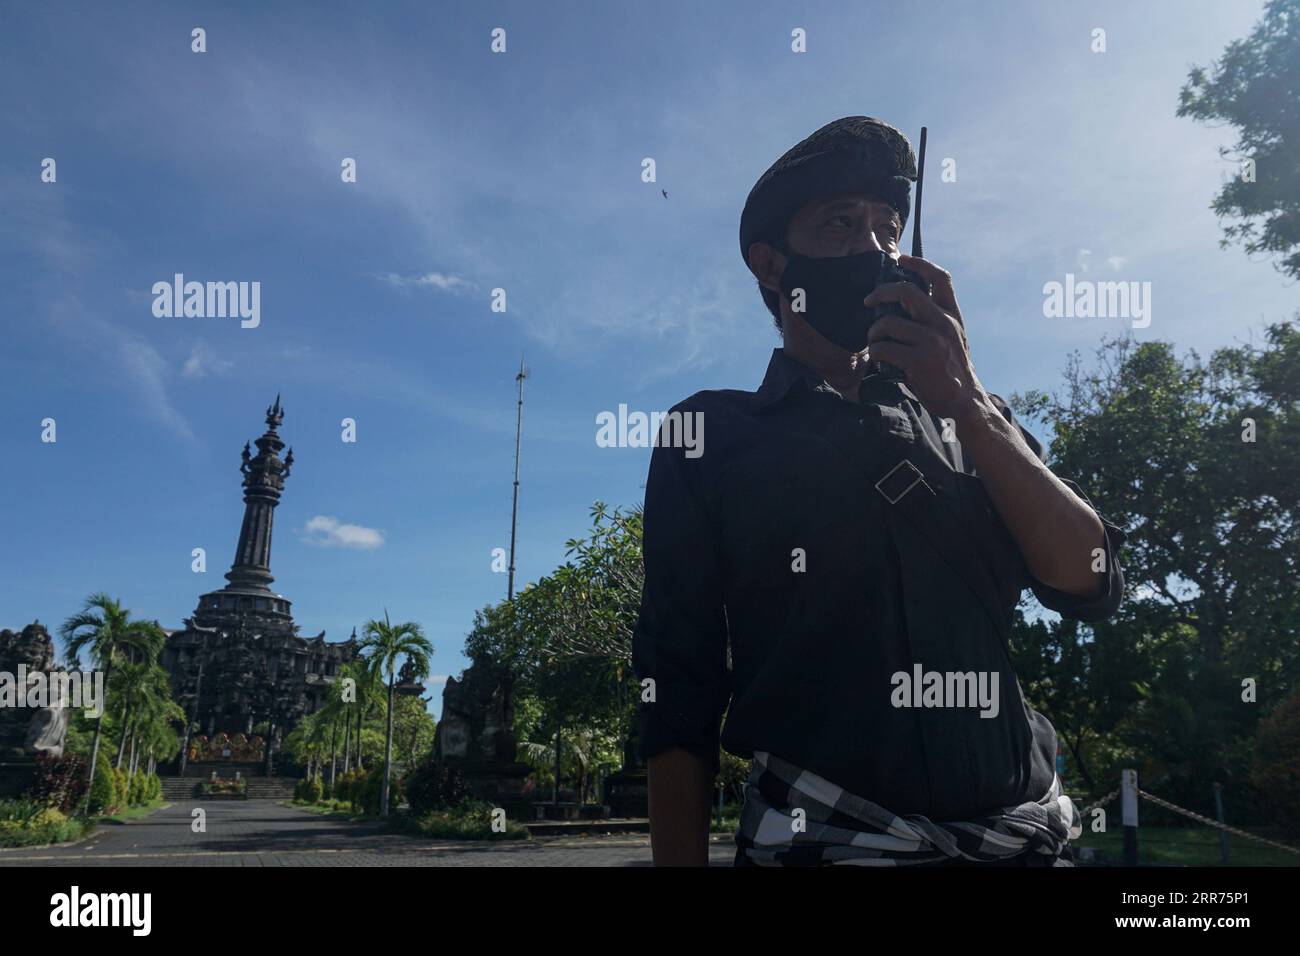 210314 -- BALI, March 14, 2021 -- A security official stands guard on street during the Nyepi Day, or the Day of Silence, amid the COVID-19 outbreak at Denpasar, Bali, Indonesia, March 14, 2021. Nyepi marks the New Year day of the Balinese Saka calendar in Indonesia. On this public holiday, locals devote themselves to fasting and meditation, while refraining from practices such as lighting fires, working, traveling and entertaining. Photo by /Xinhua INDONESIA-BALI-COVID-19-NYEPI DAY Bisinglasi PUBLICATIONxNOTxINxCHN Stock Photo